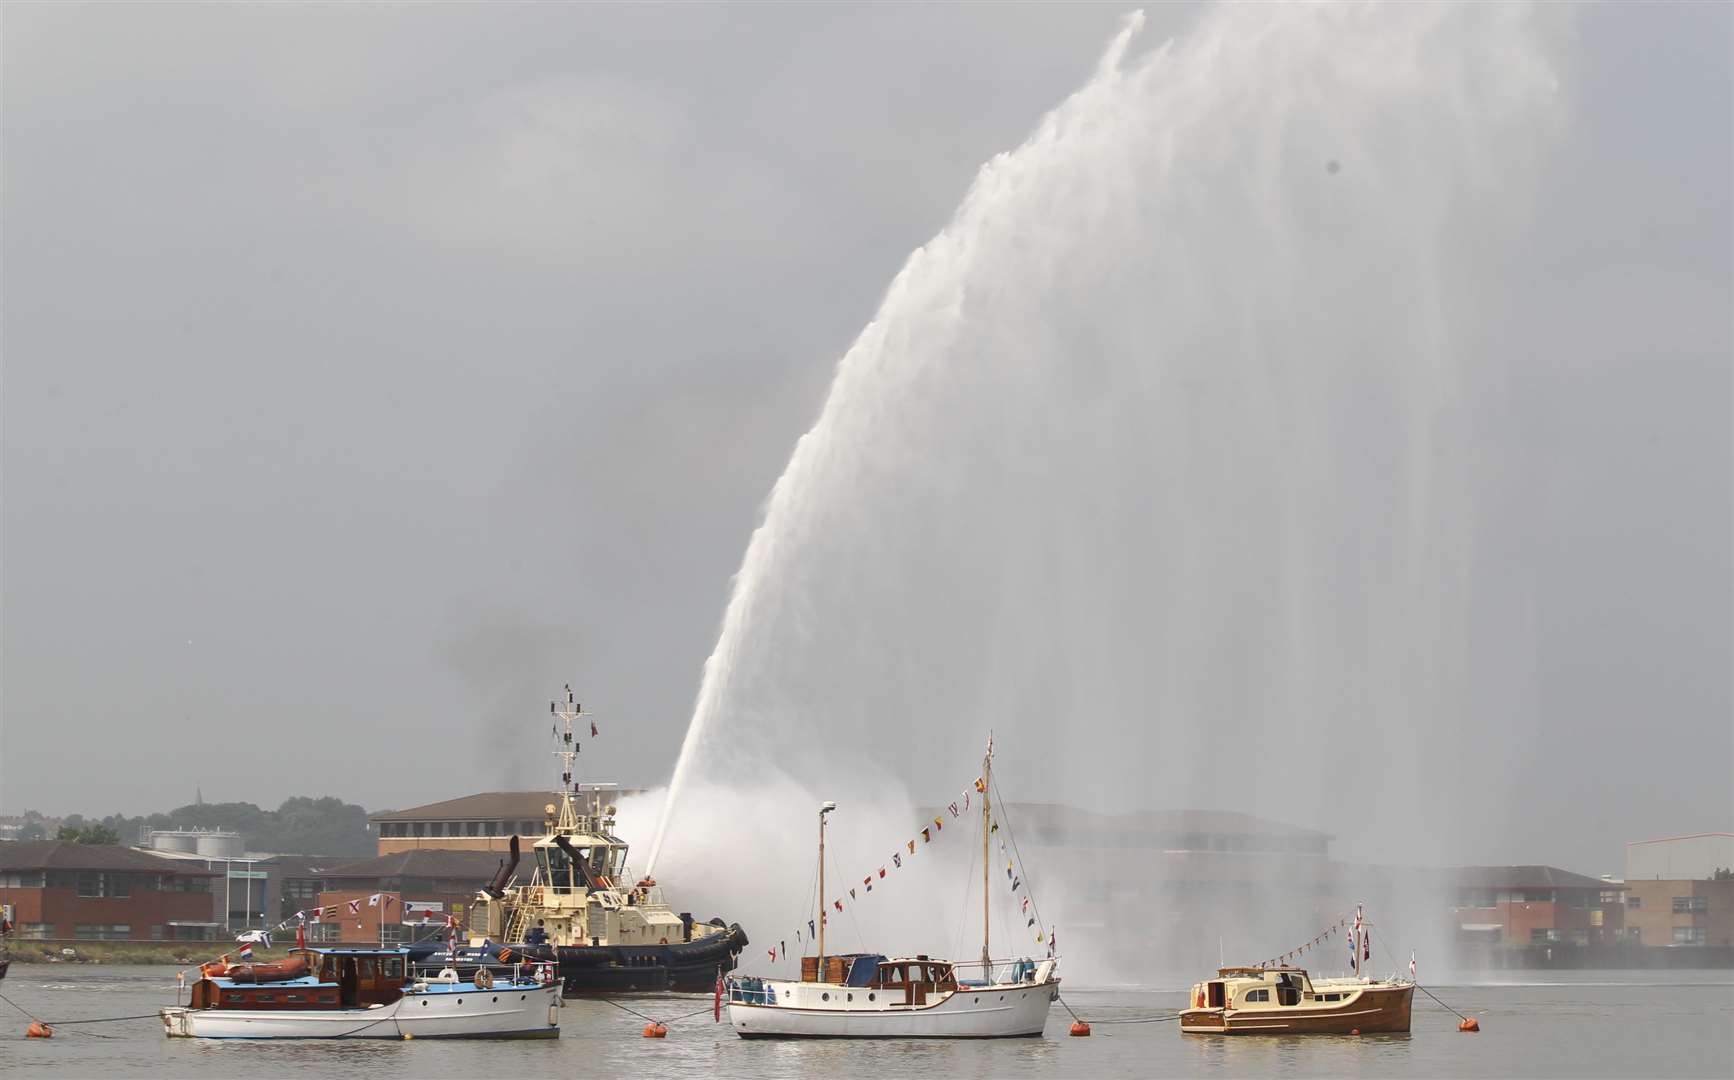 A fire boat shoots water in the air at a previous festival on the Medway Picture: John Westhrop